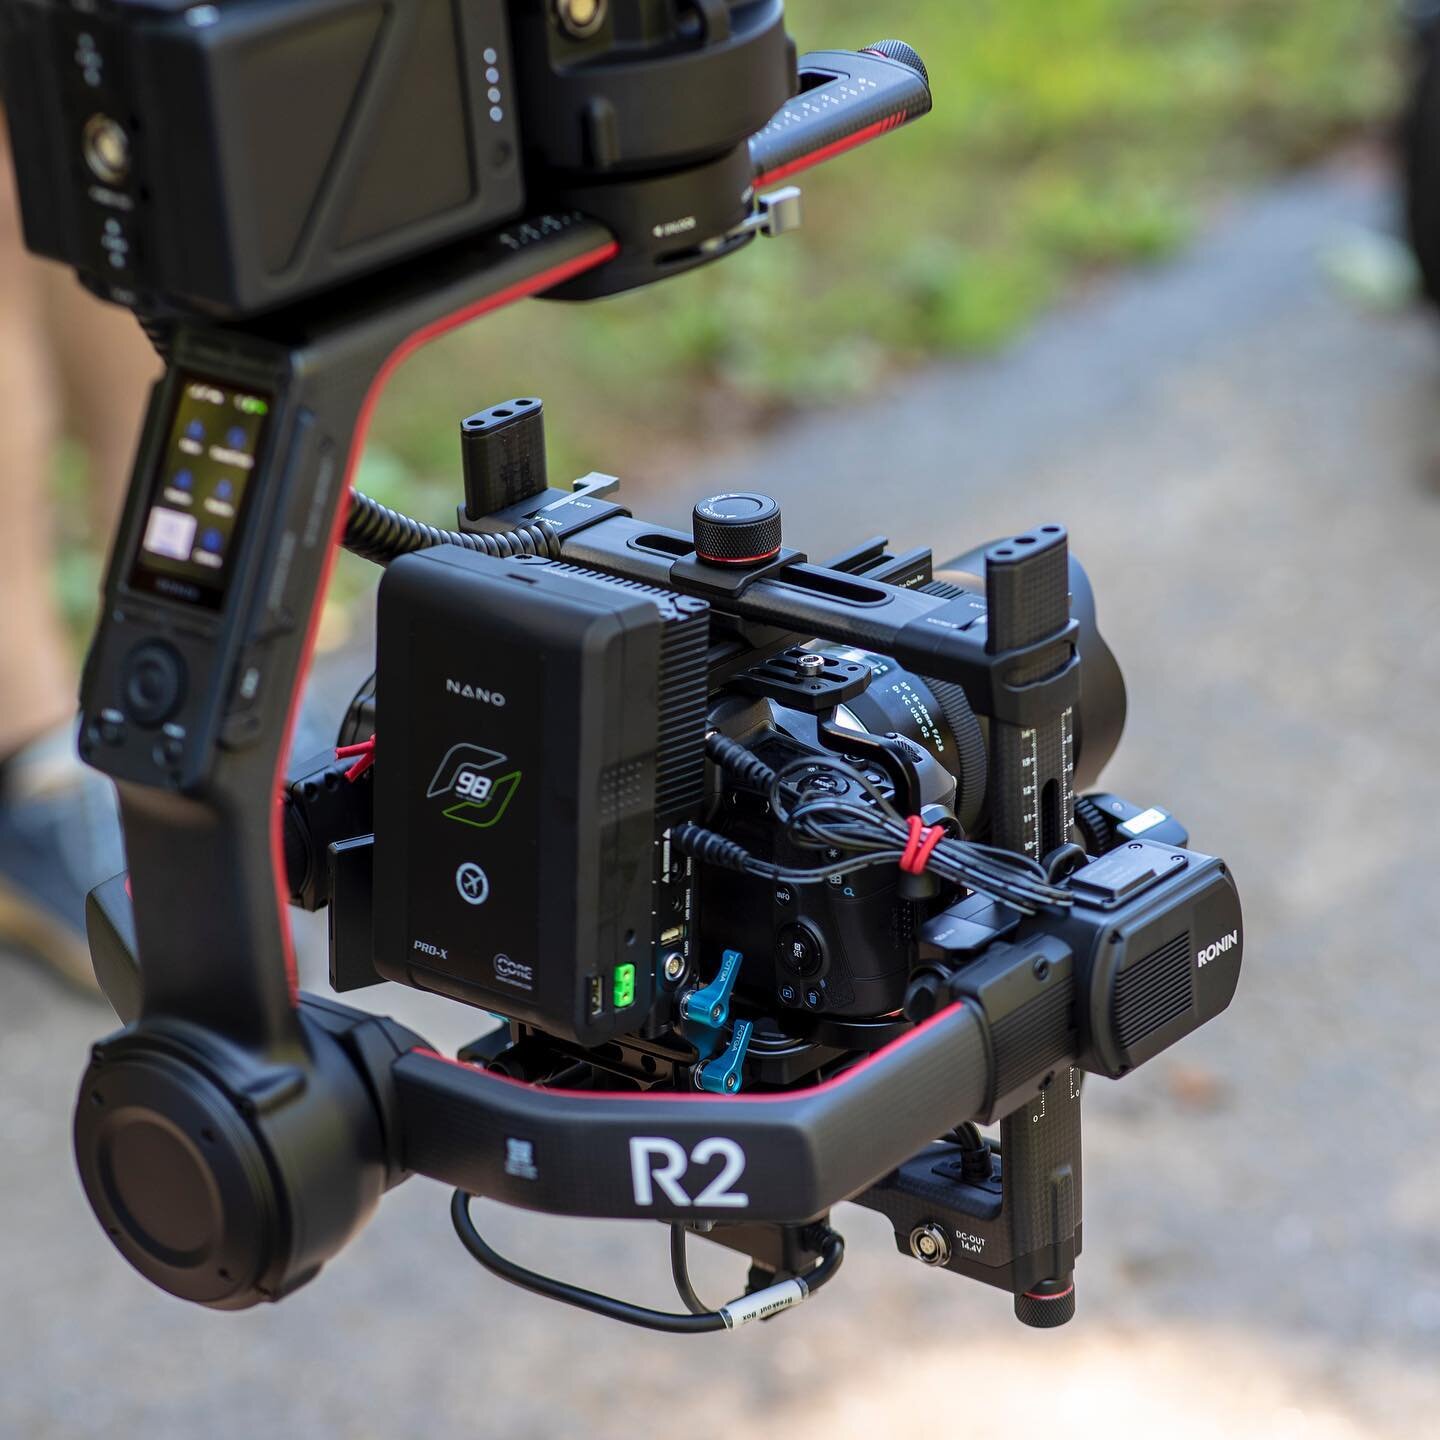 So I can 100% confirm after doing a pretty technical shoot chasing a motorcycle in the mountains the Ronin 2 + the black arm is capable of some amazing things. I&rsquo;ll post some video examples from the shoot soon. #canoneosr #blackarm #flowcinebla